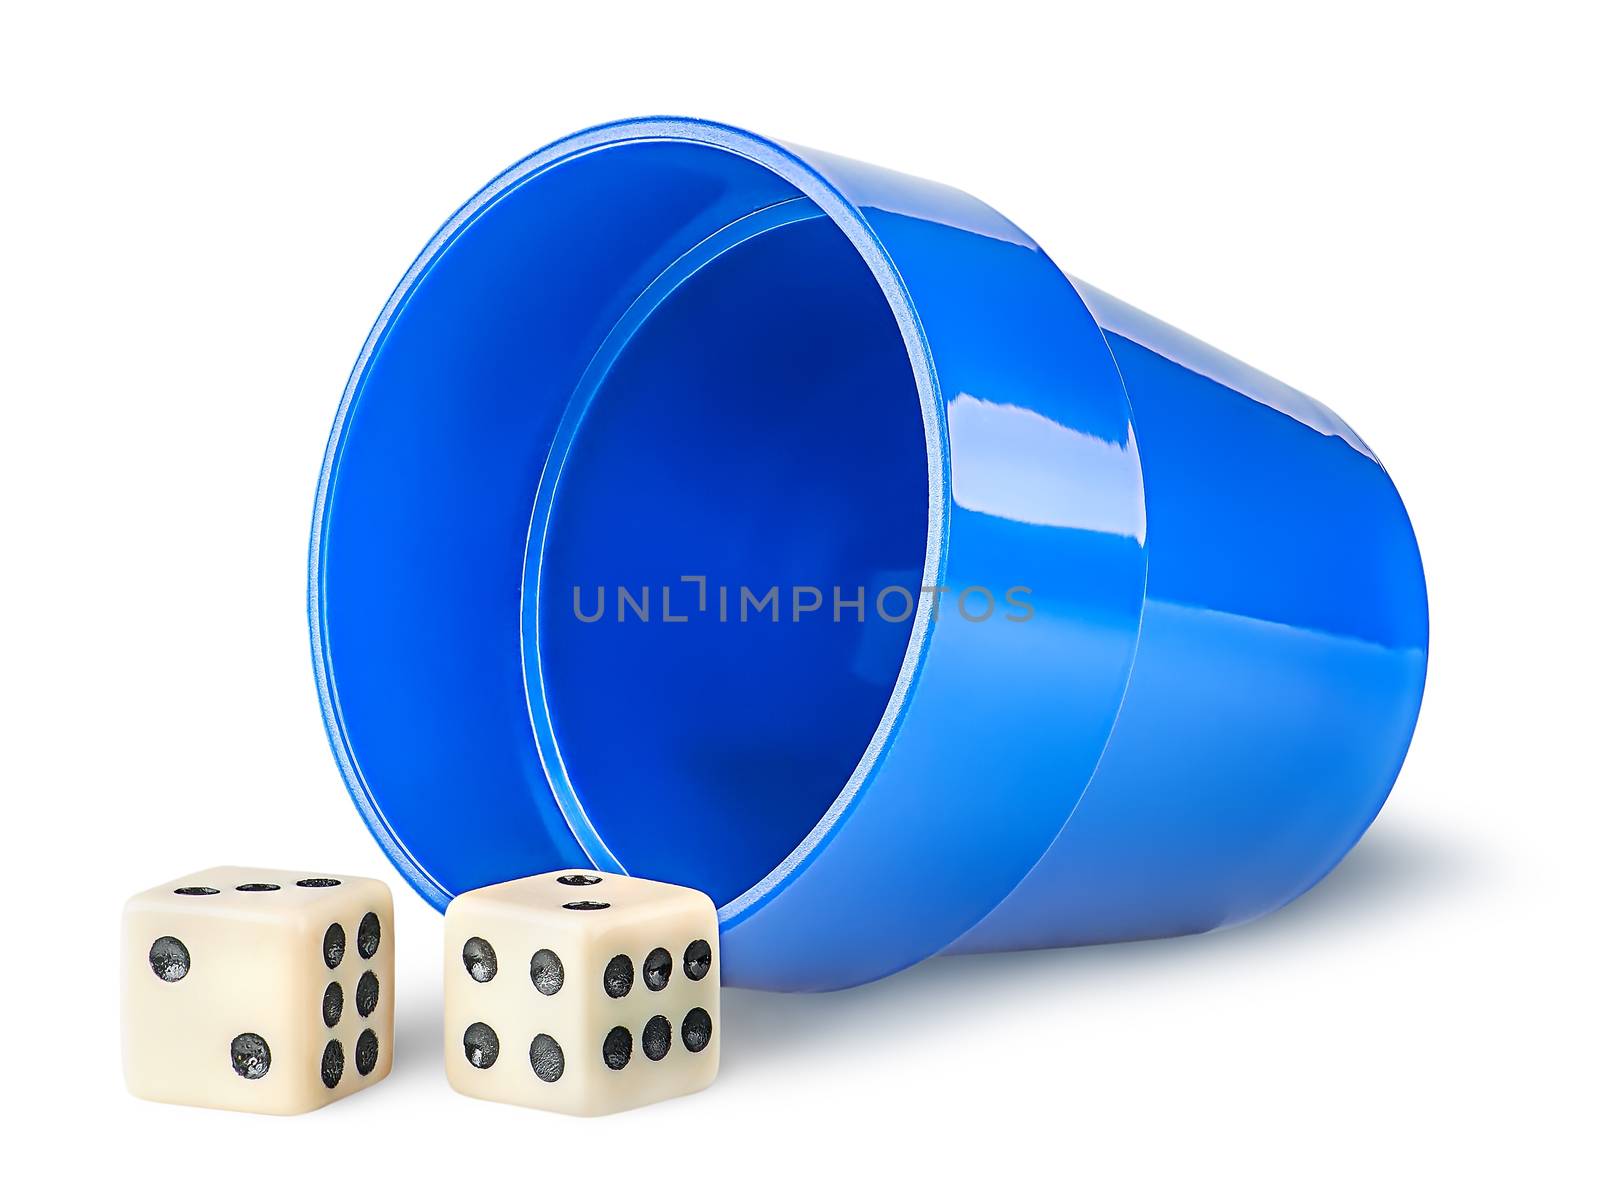 Gaming dice and cup by Cipariss